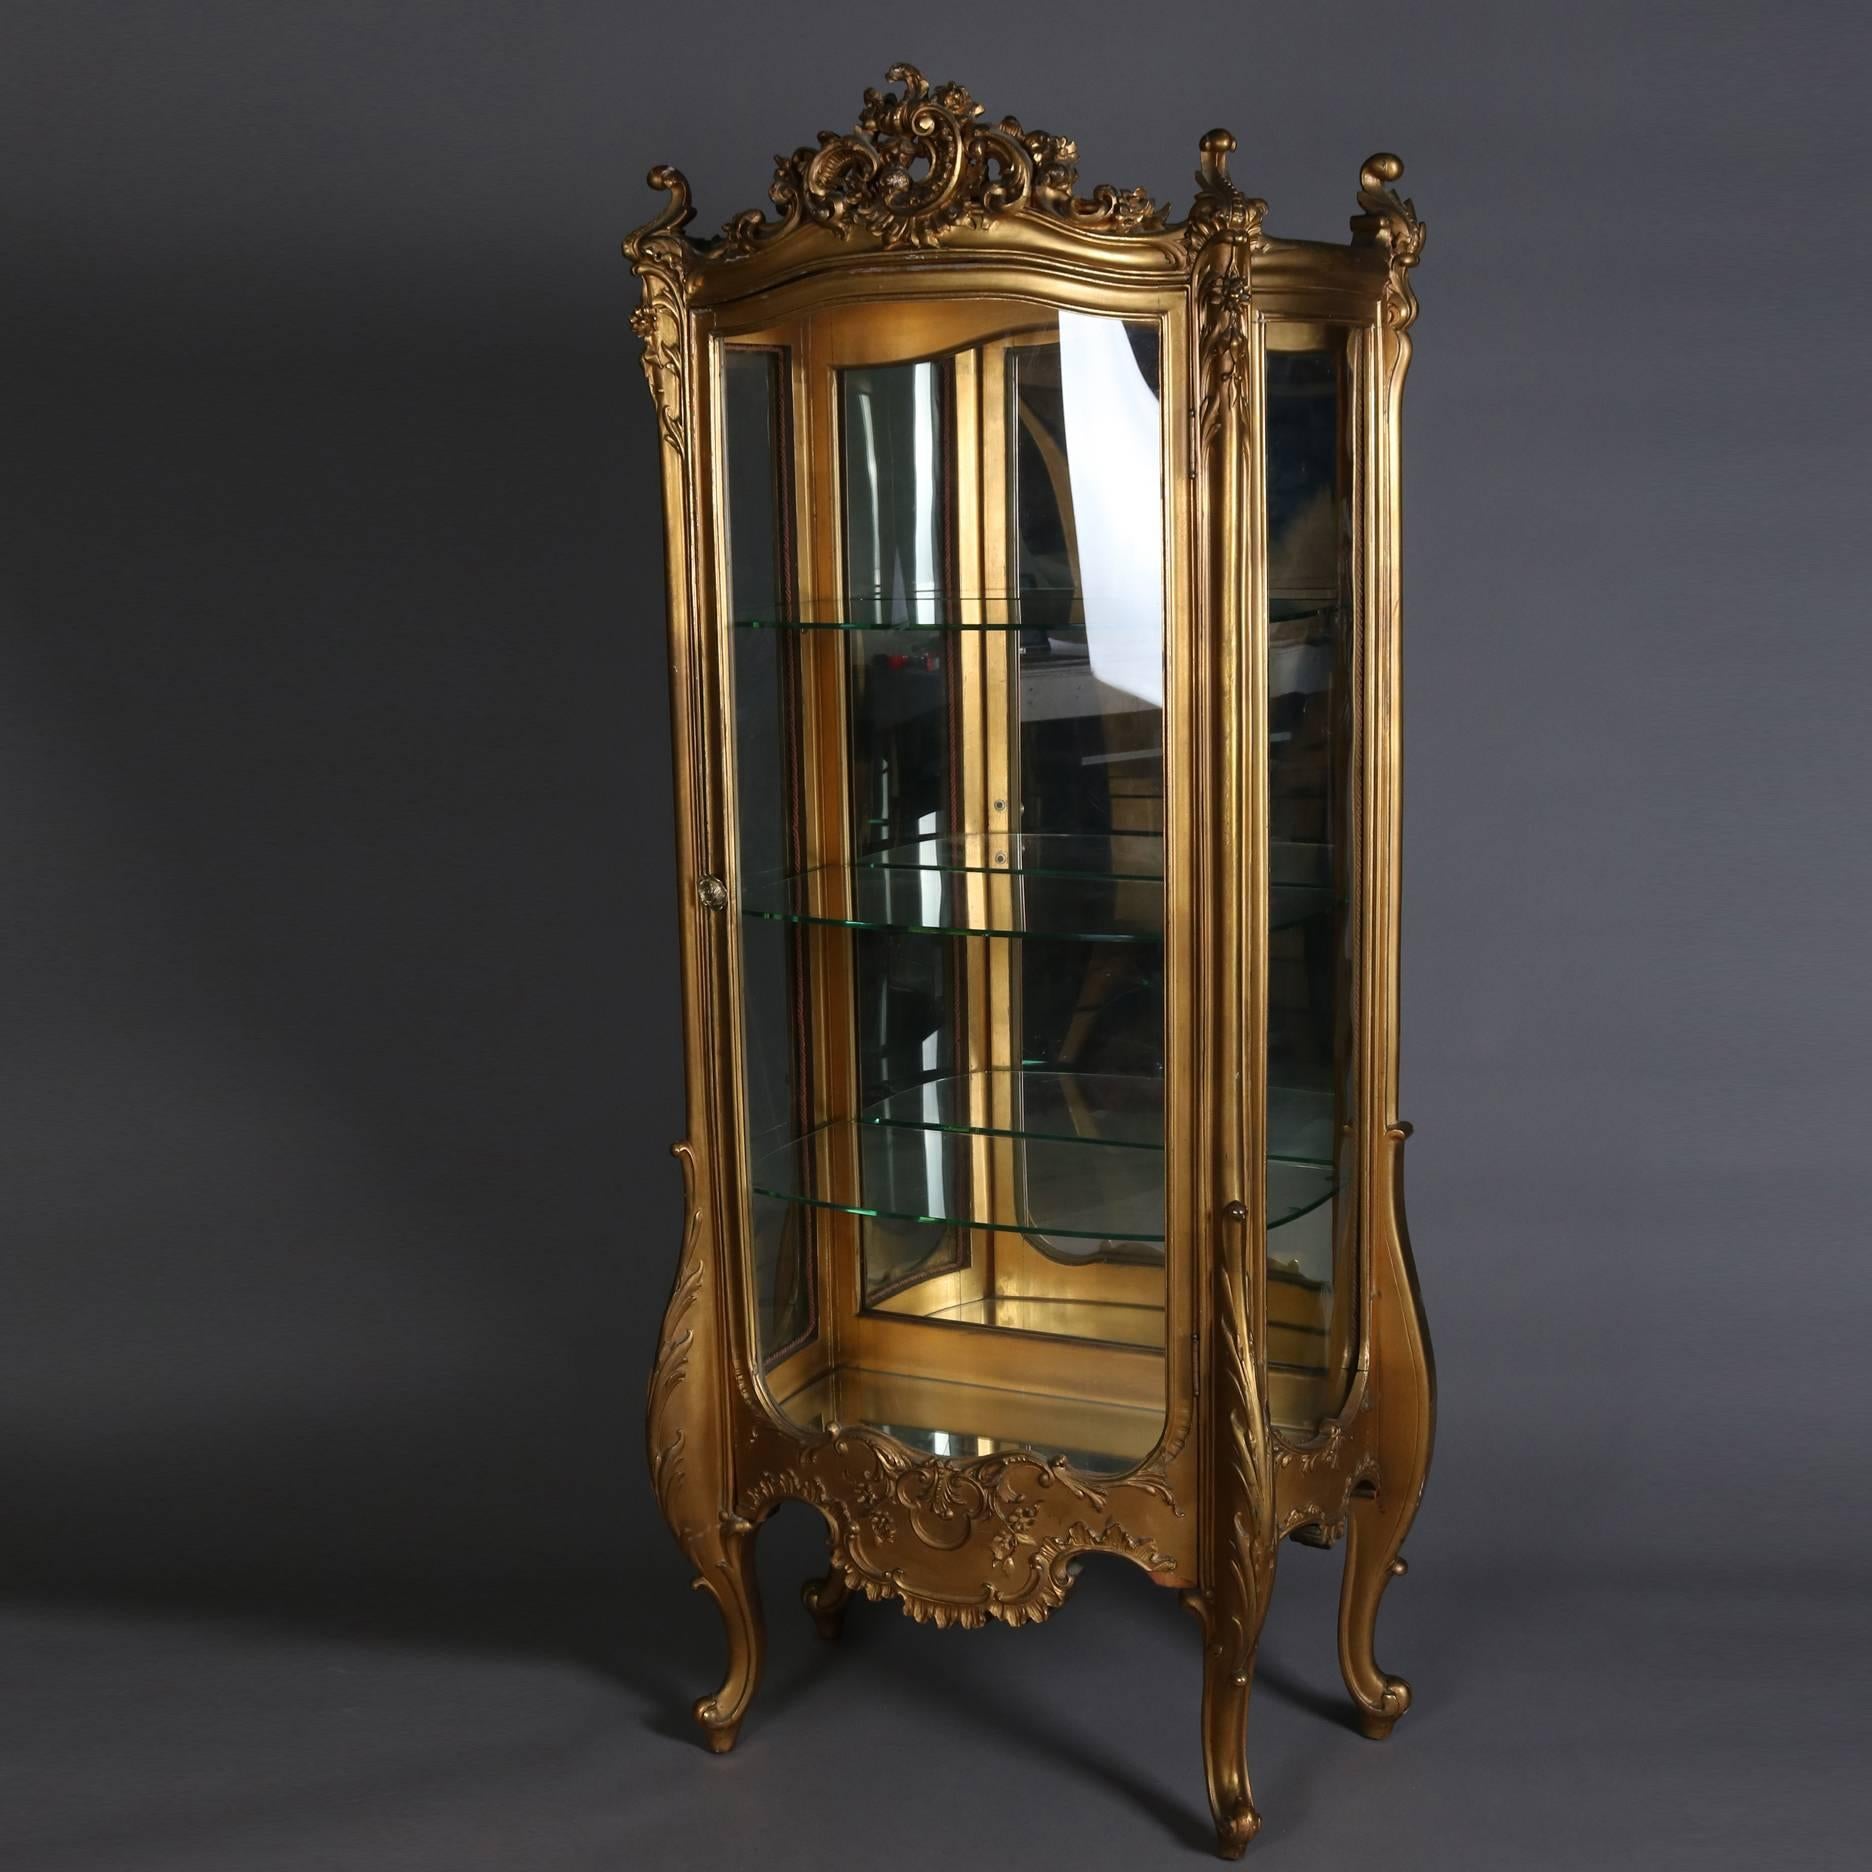 Antique French Louis XIV vitrine features giltwood case with scroll, foliate and floral decoration, pierced crest with cartouche, seated on exaggerated cabriole legs, single bow front glass door opens to mirror back interior display with glass